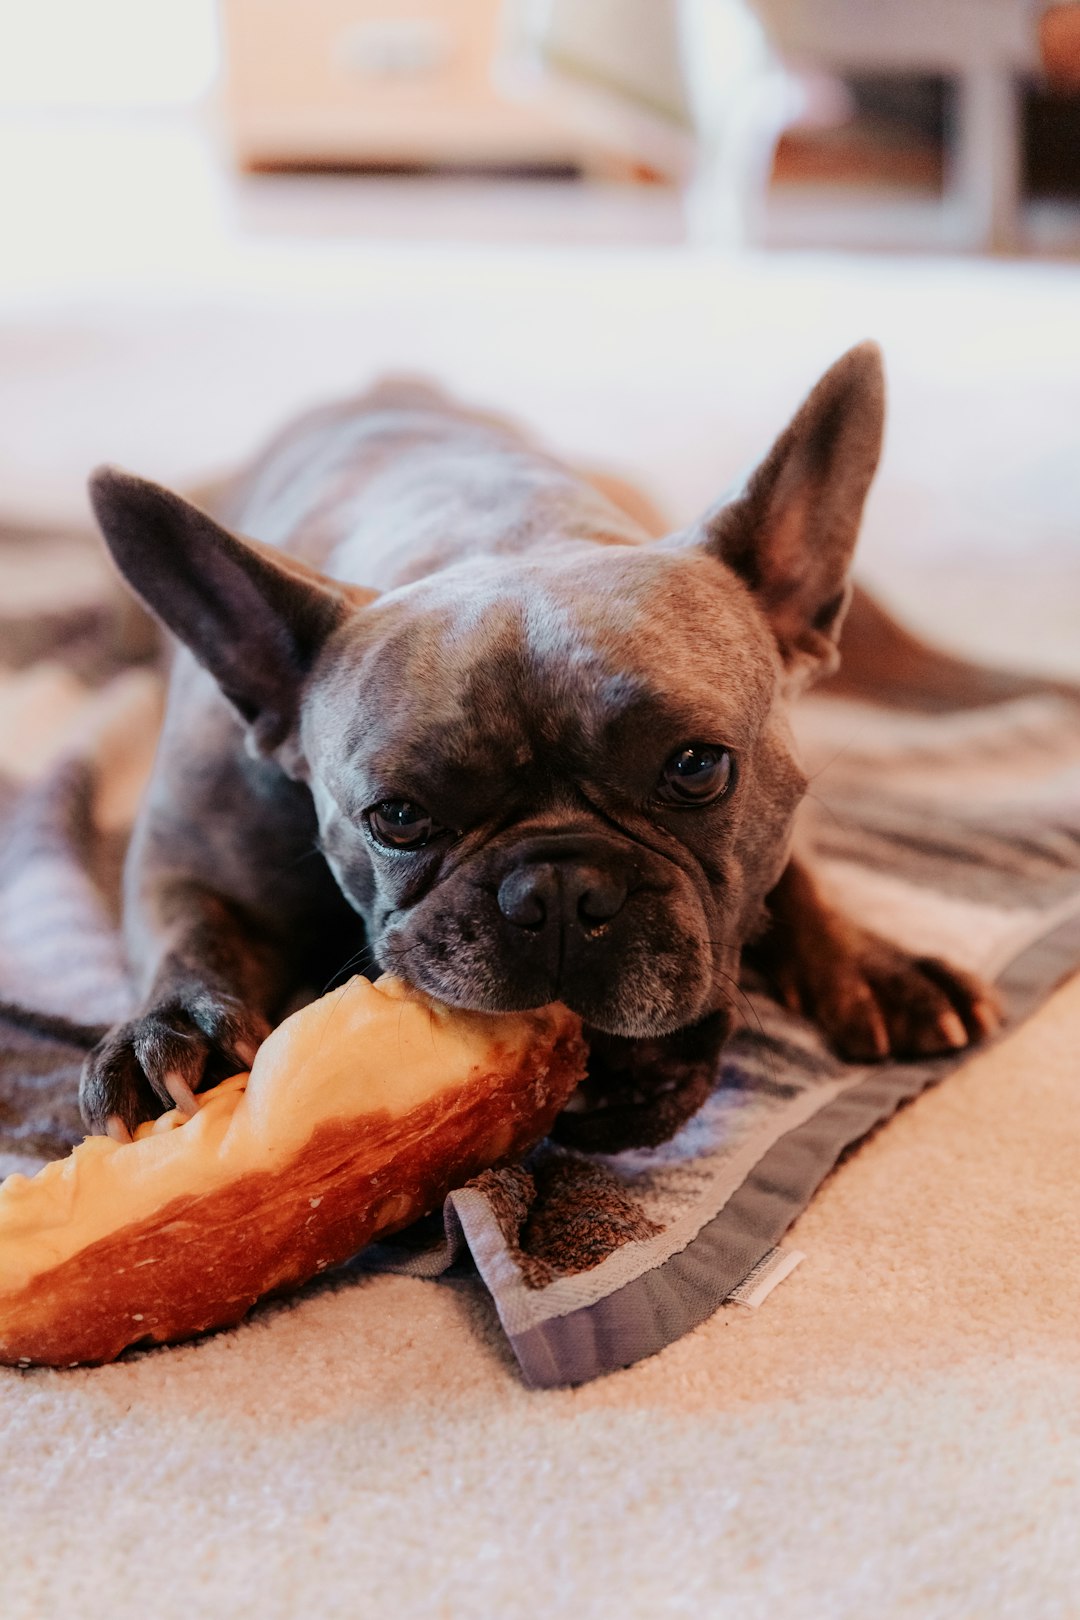 Healthy and Delicious: Grain-Free Goodies for Your Pup's Homemade Delights